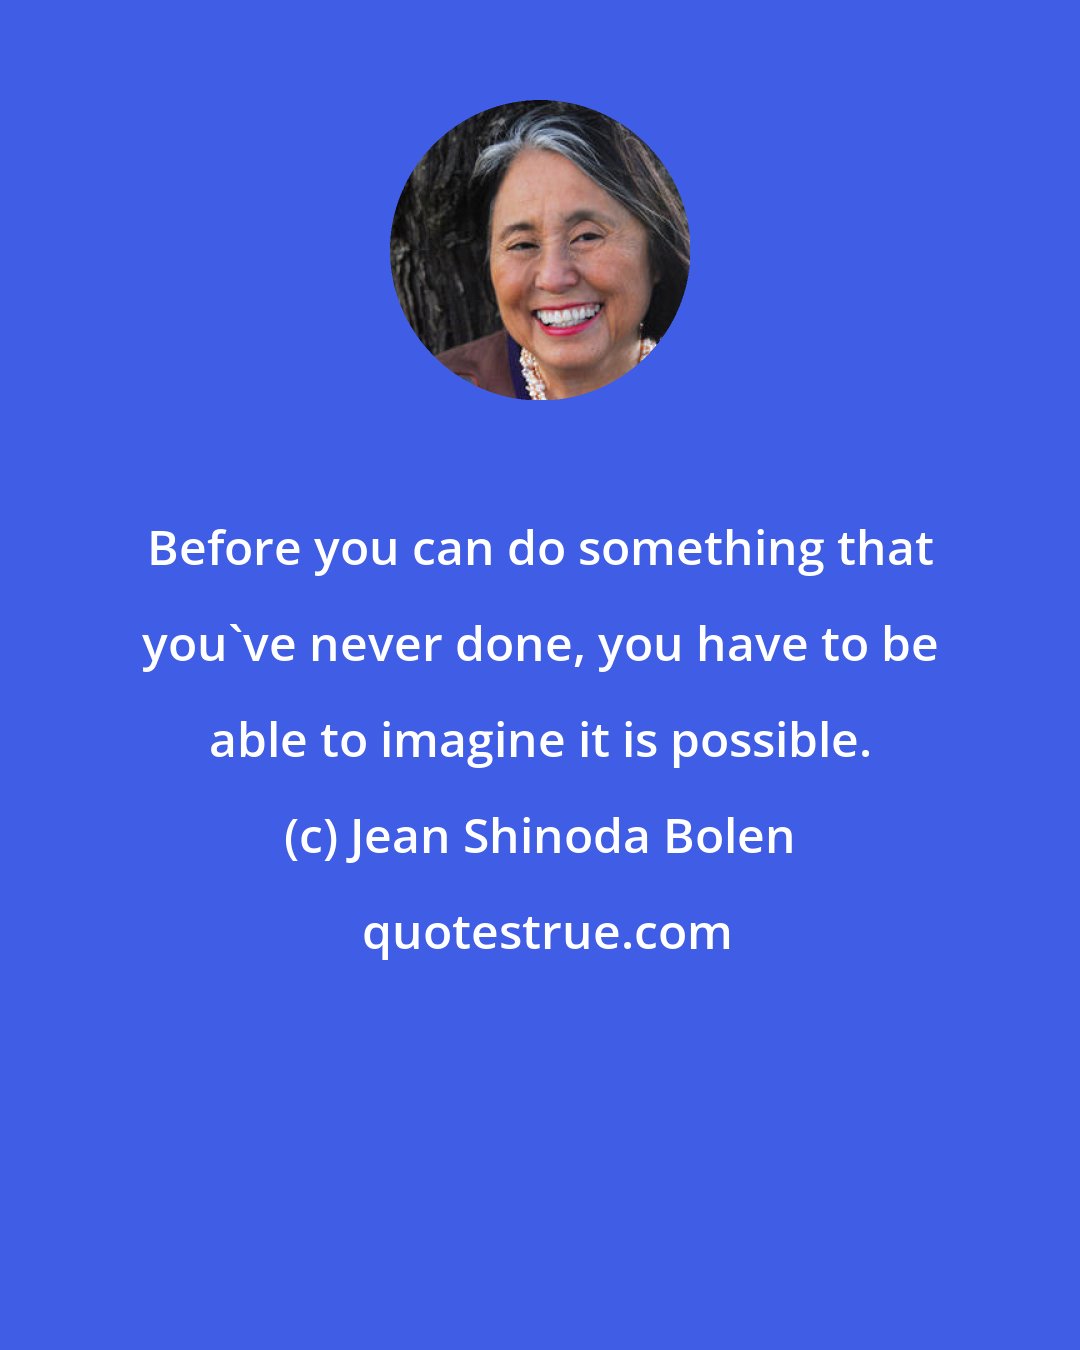 Jean Shinoda Bolen: Before you can do something that you've never done, you have to be able to imagine it is possible.